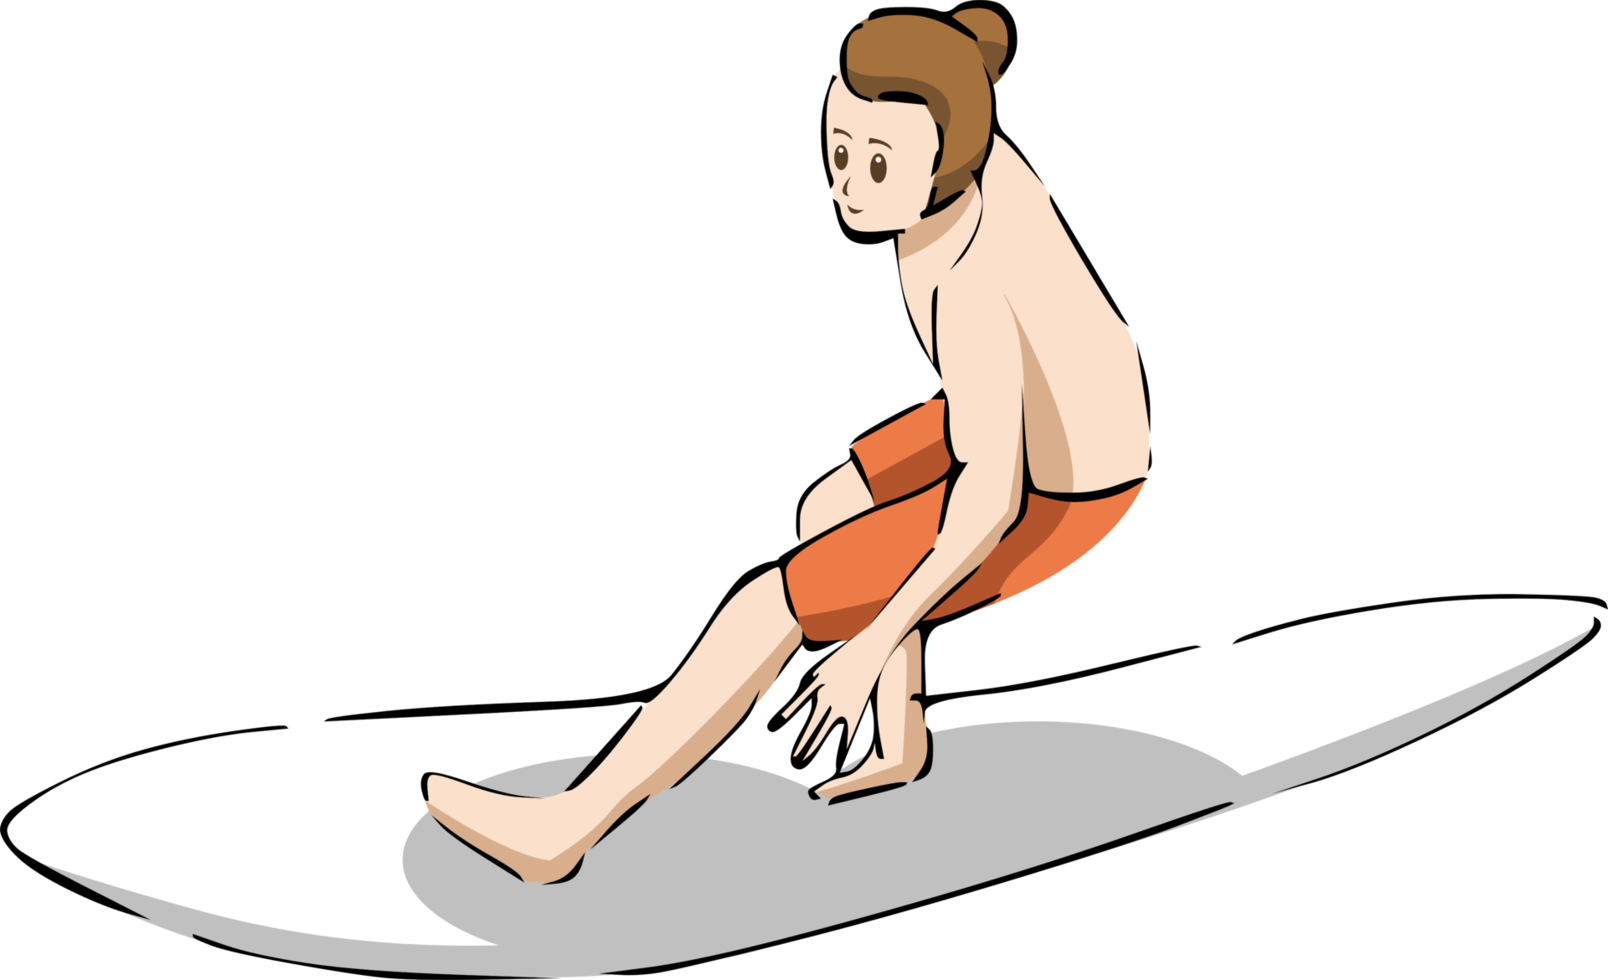 surfing player png graphic clipart design